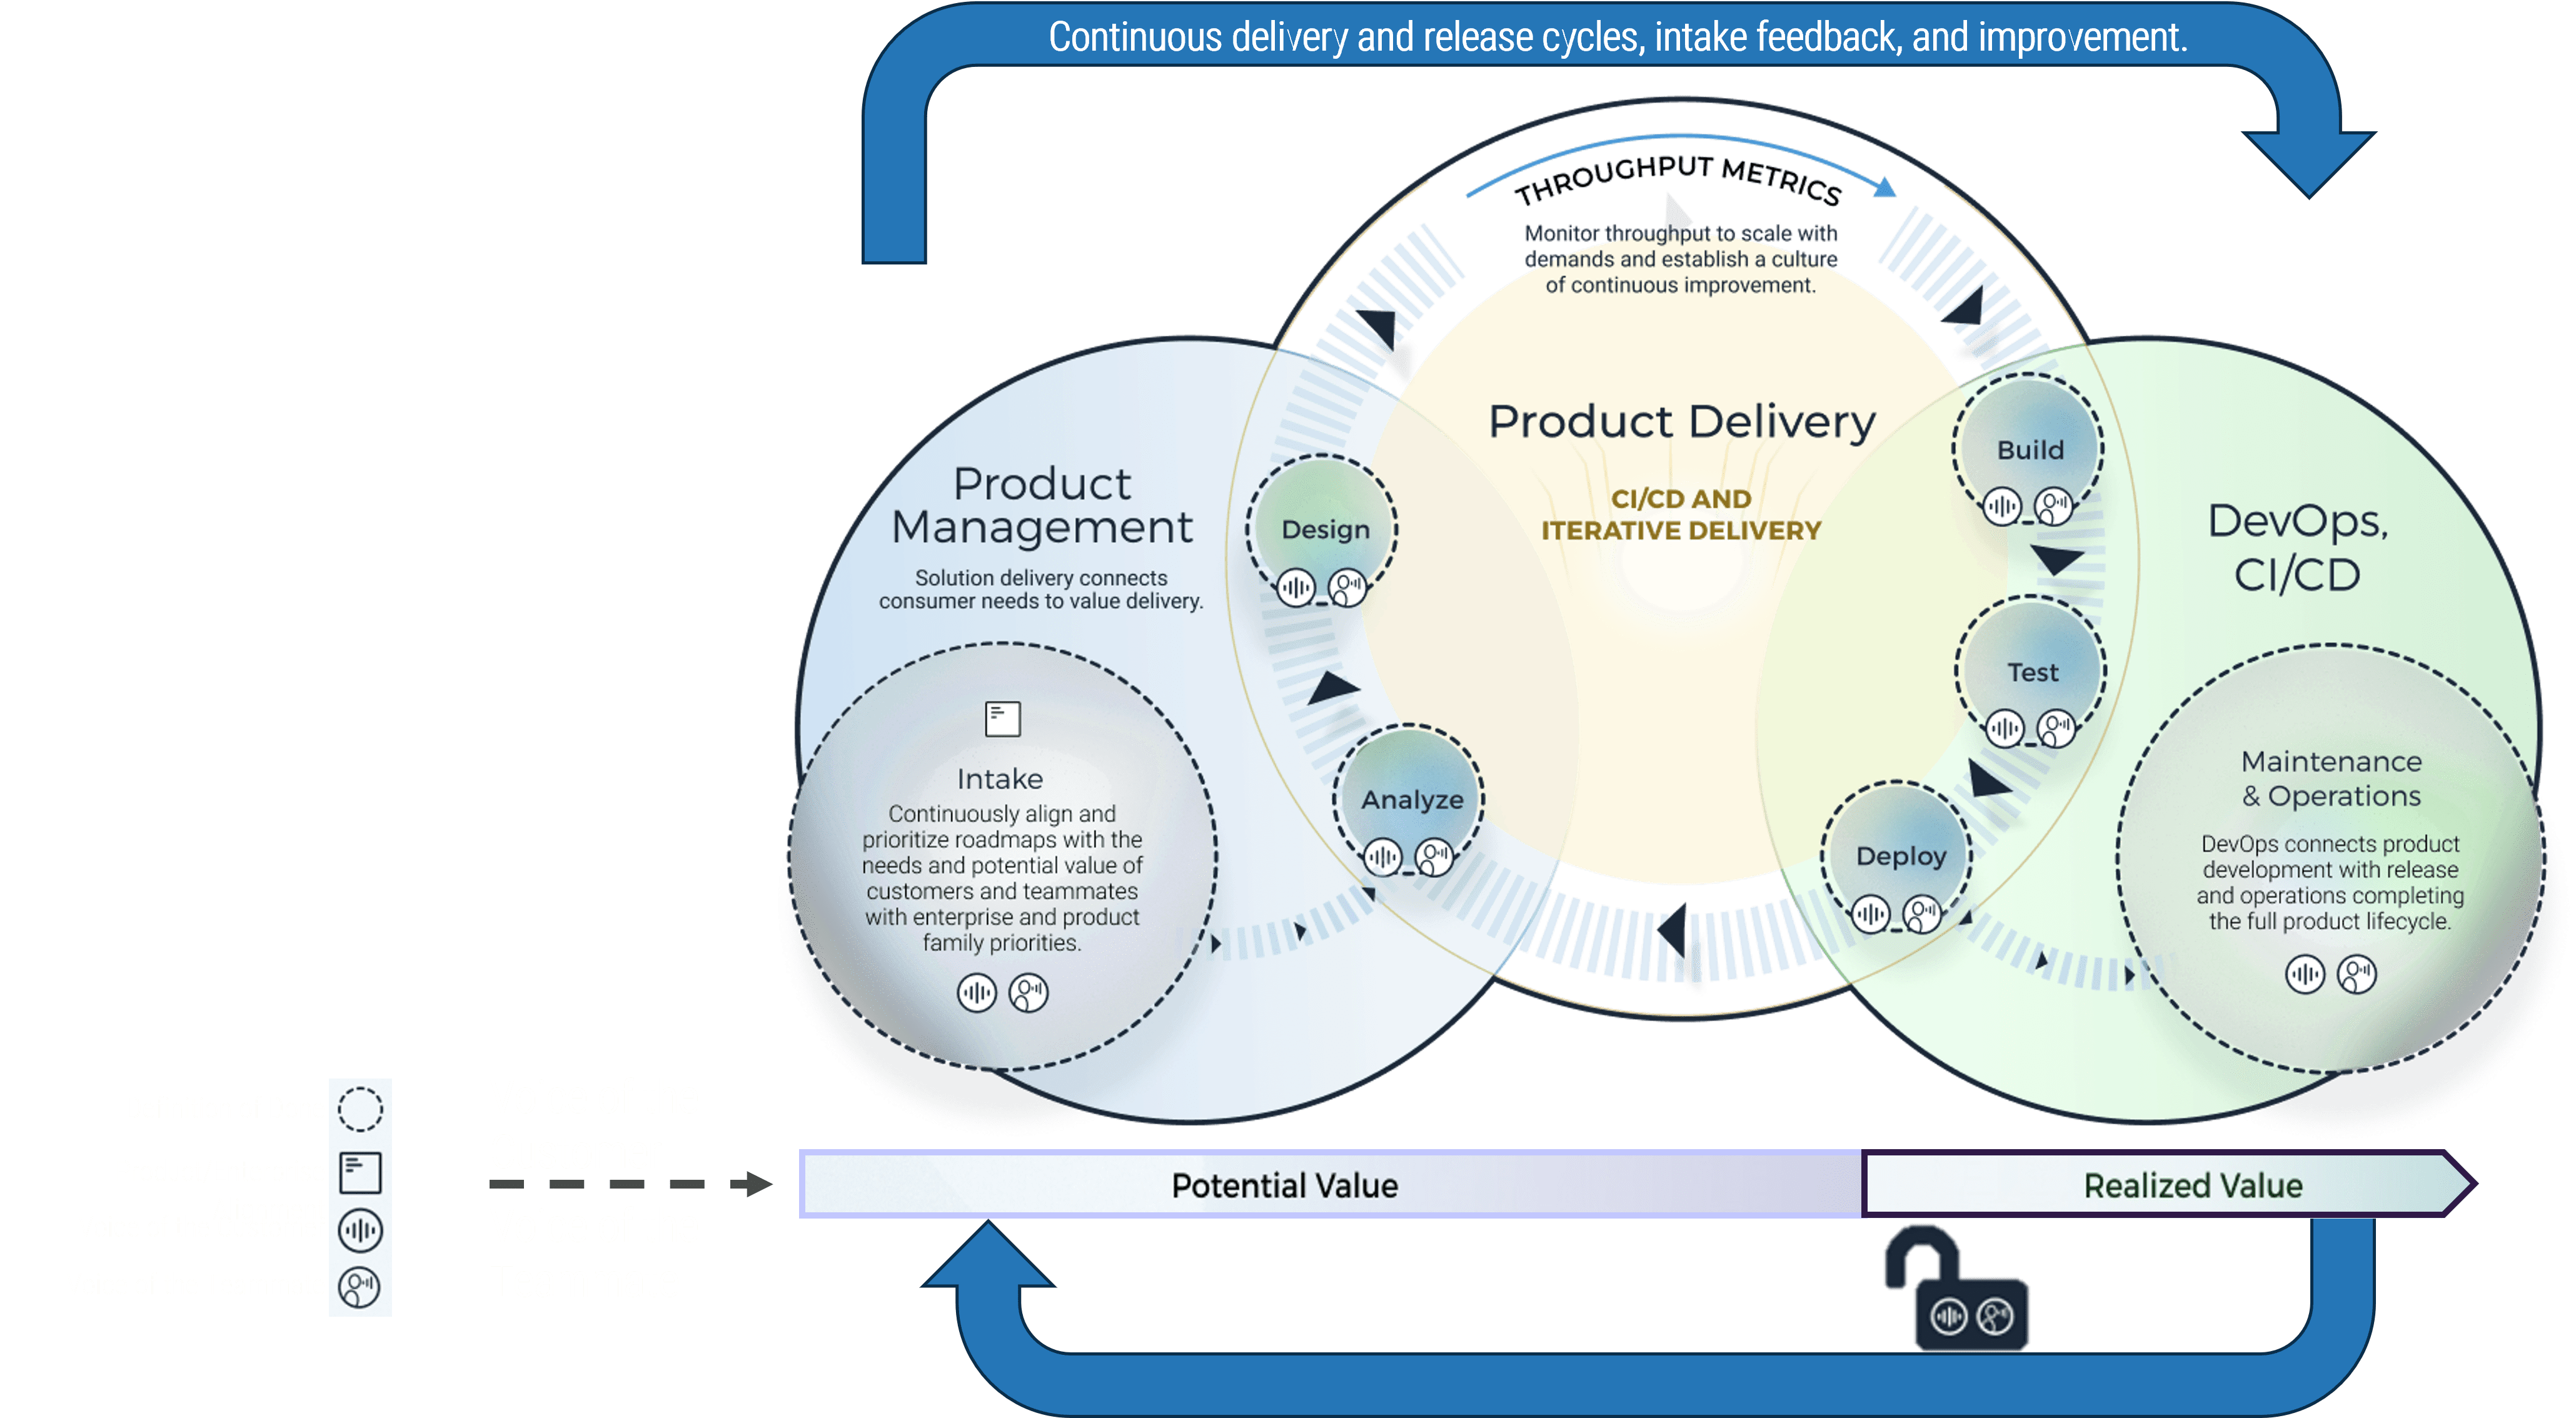 A large diagram of phase circles. The main circle in the center is 'Product Delivery' with the four cycle steps incl. an extra 'test', to the left is 'Product Management' with Intake, and to the right is 'DevOps. Ci/CD' with the output 'Maintenance & Operations'. The first two circles fall under 'Potential Value' and the final one is 'Realized Value'. There is a legend defining different icons and line-types.